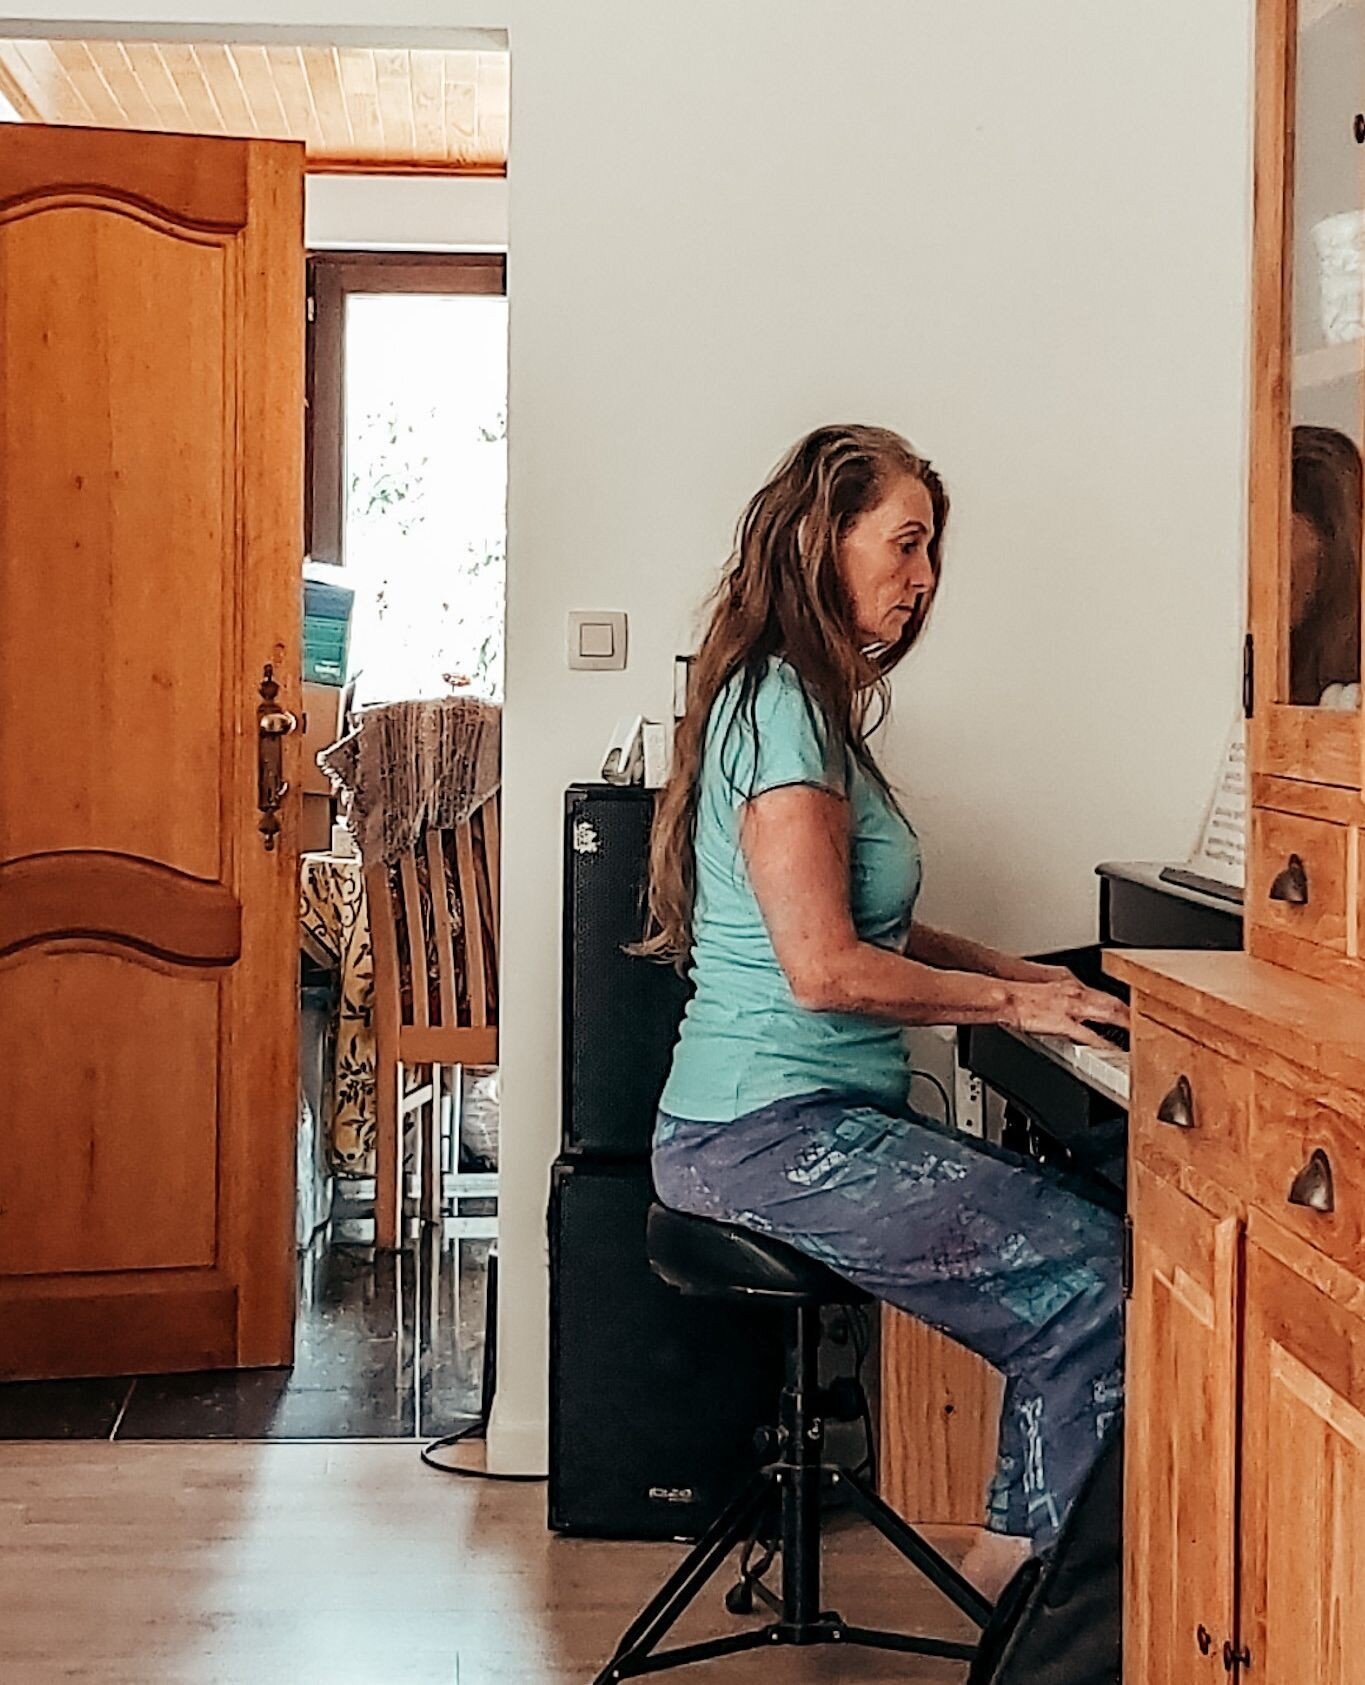 I loved playing the piano. I had piano lessons for over 10 years and played 1h/day. It's a hard job, to get the technique. When I started having an office job , I stopped playing, because I felt I needed to move, instead of sitting again. So I lost a